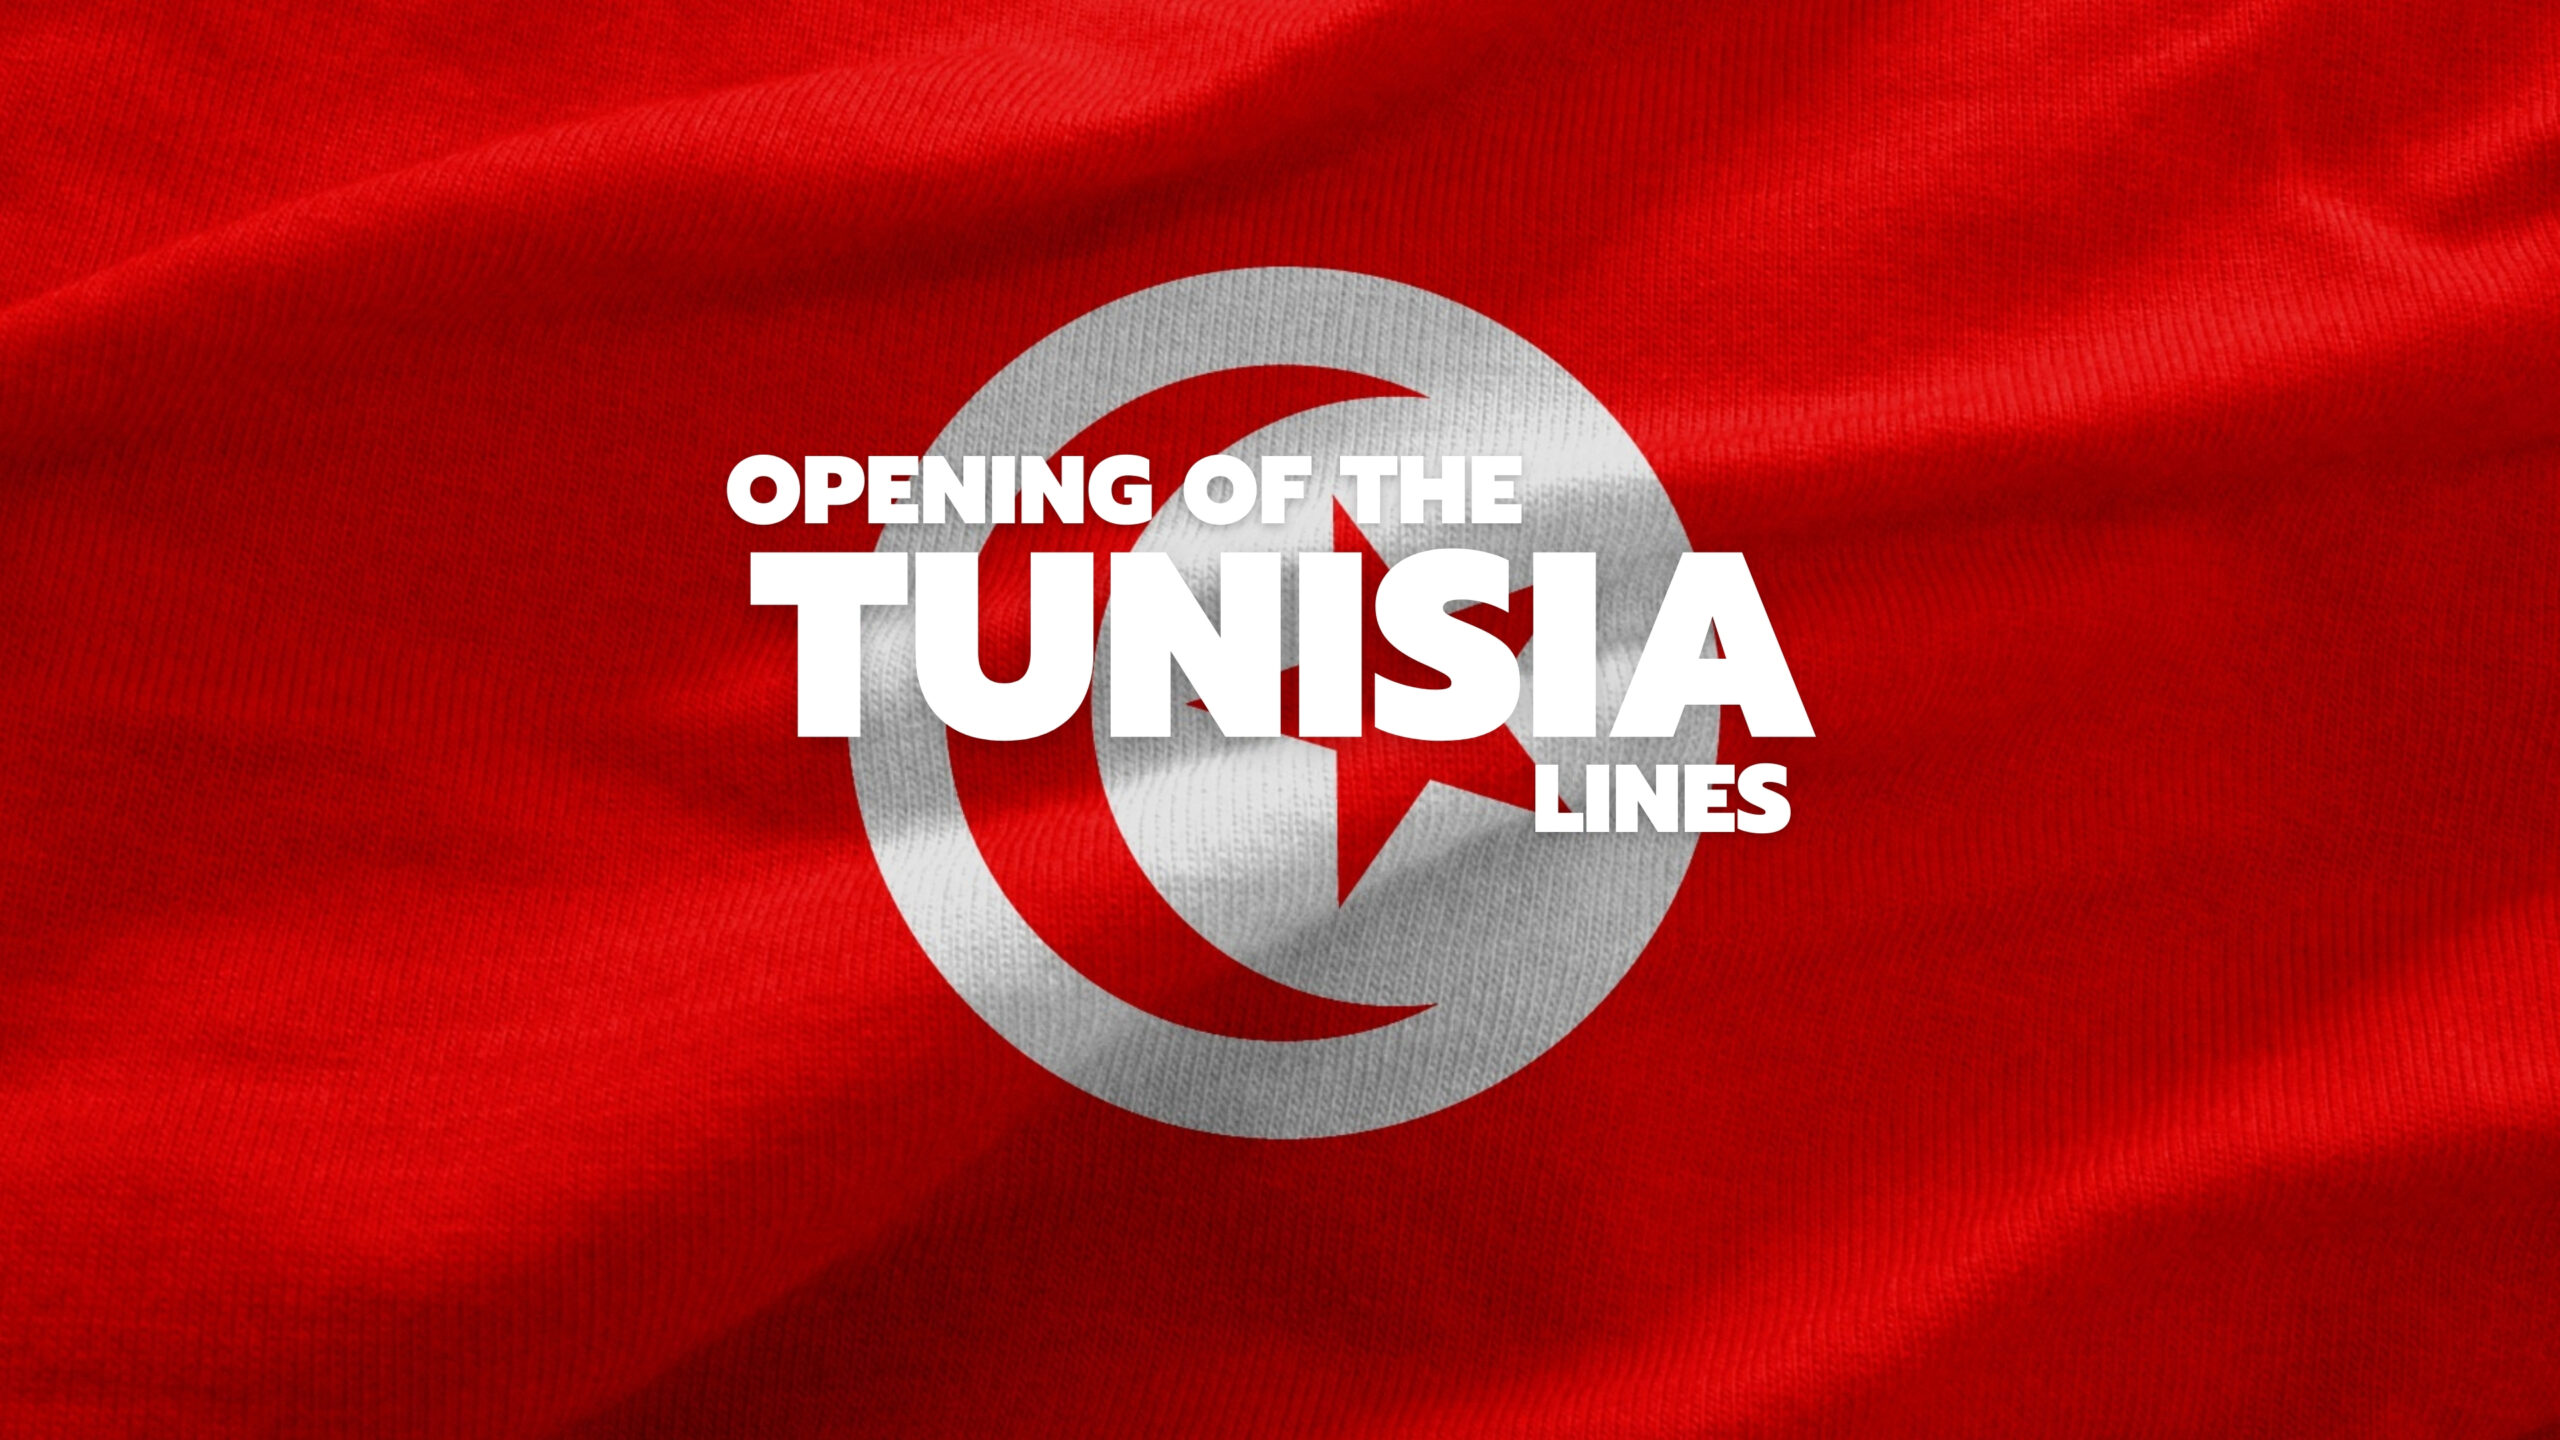 BOOK YOUR NEXT CROSSING TO TUNISIA !